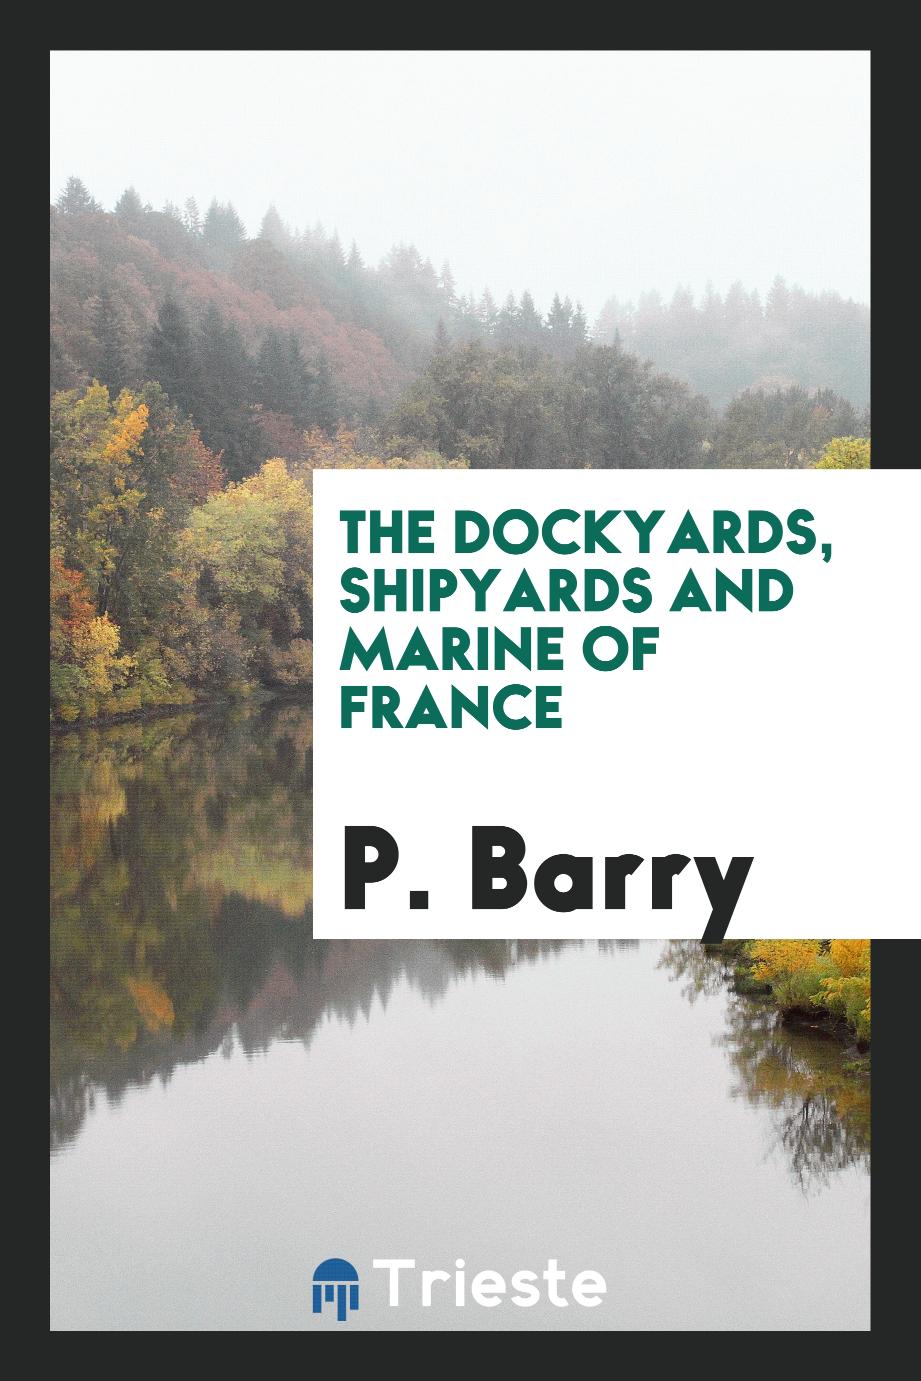 P. Barry - The Dockyards, Shipyards and Marine of France